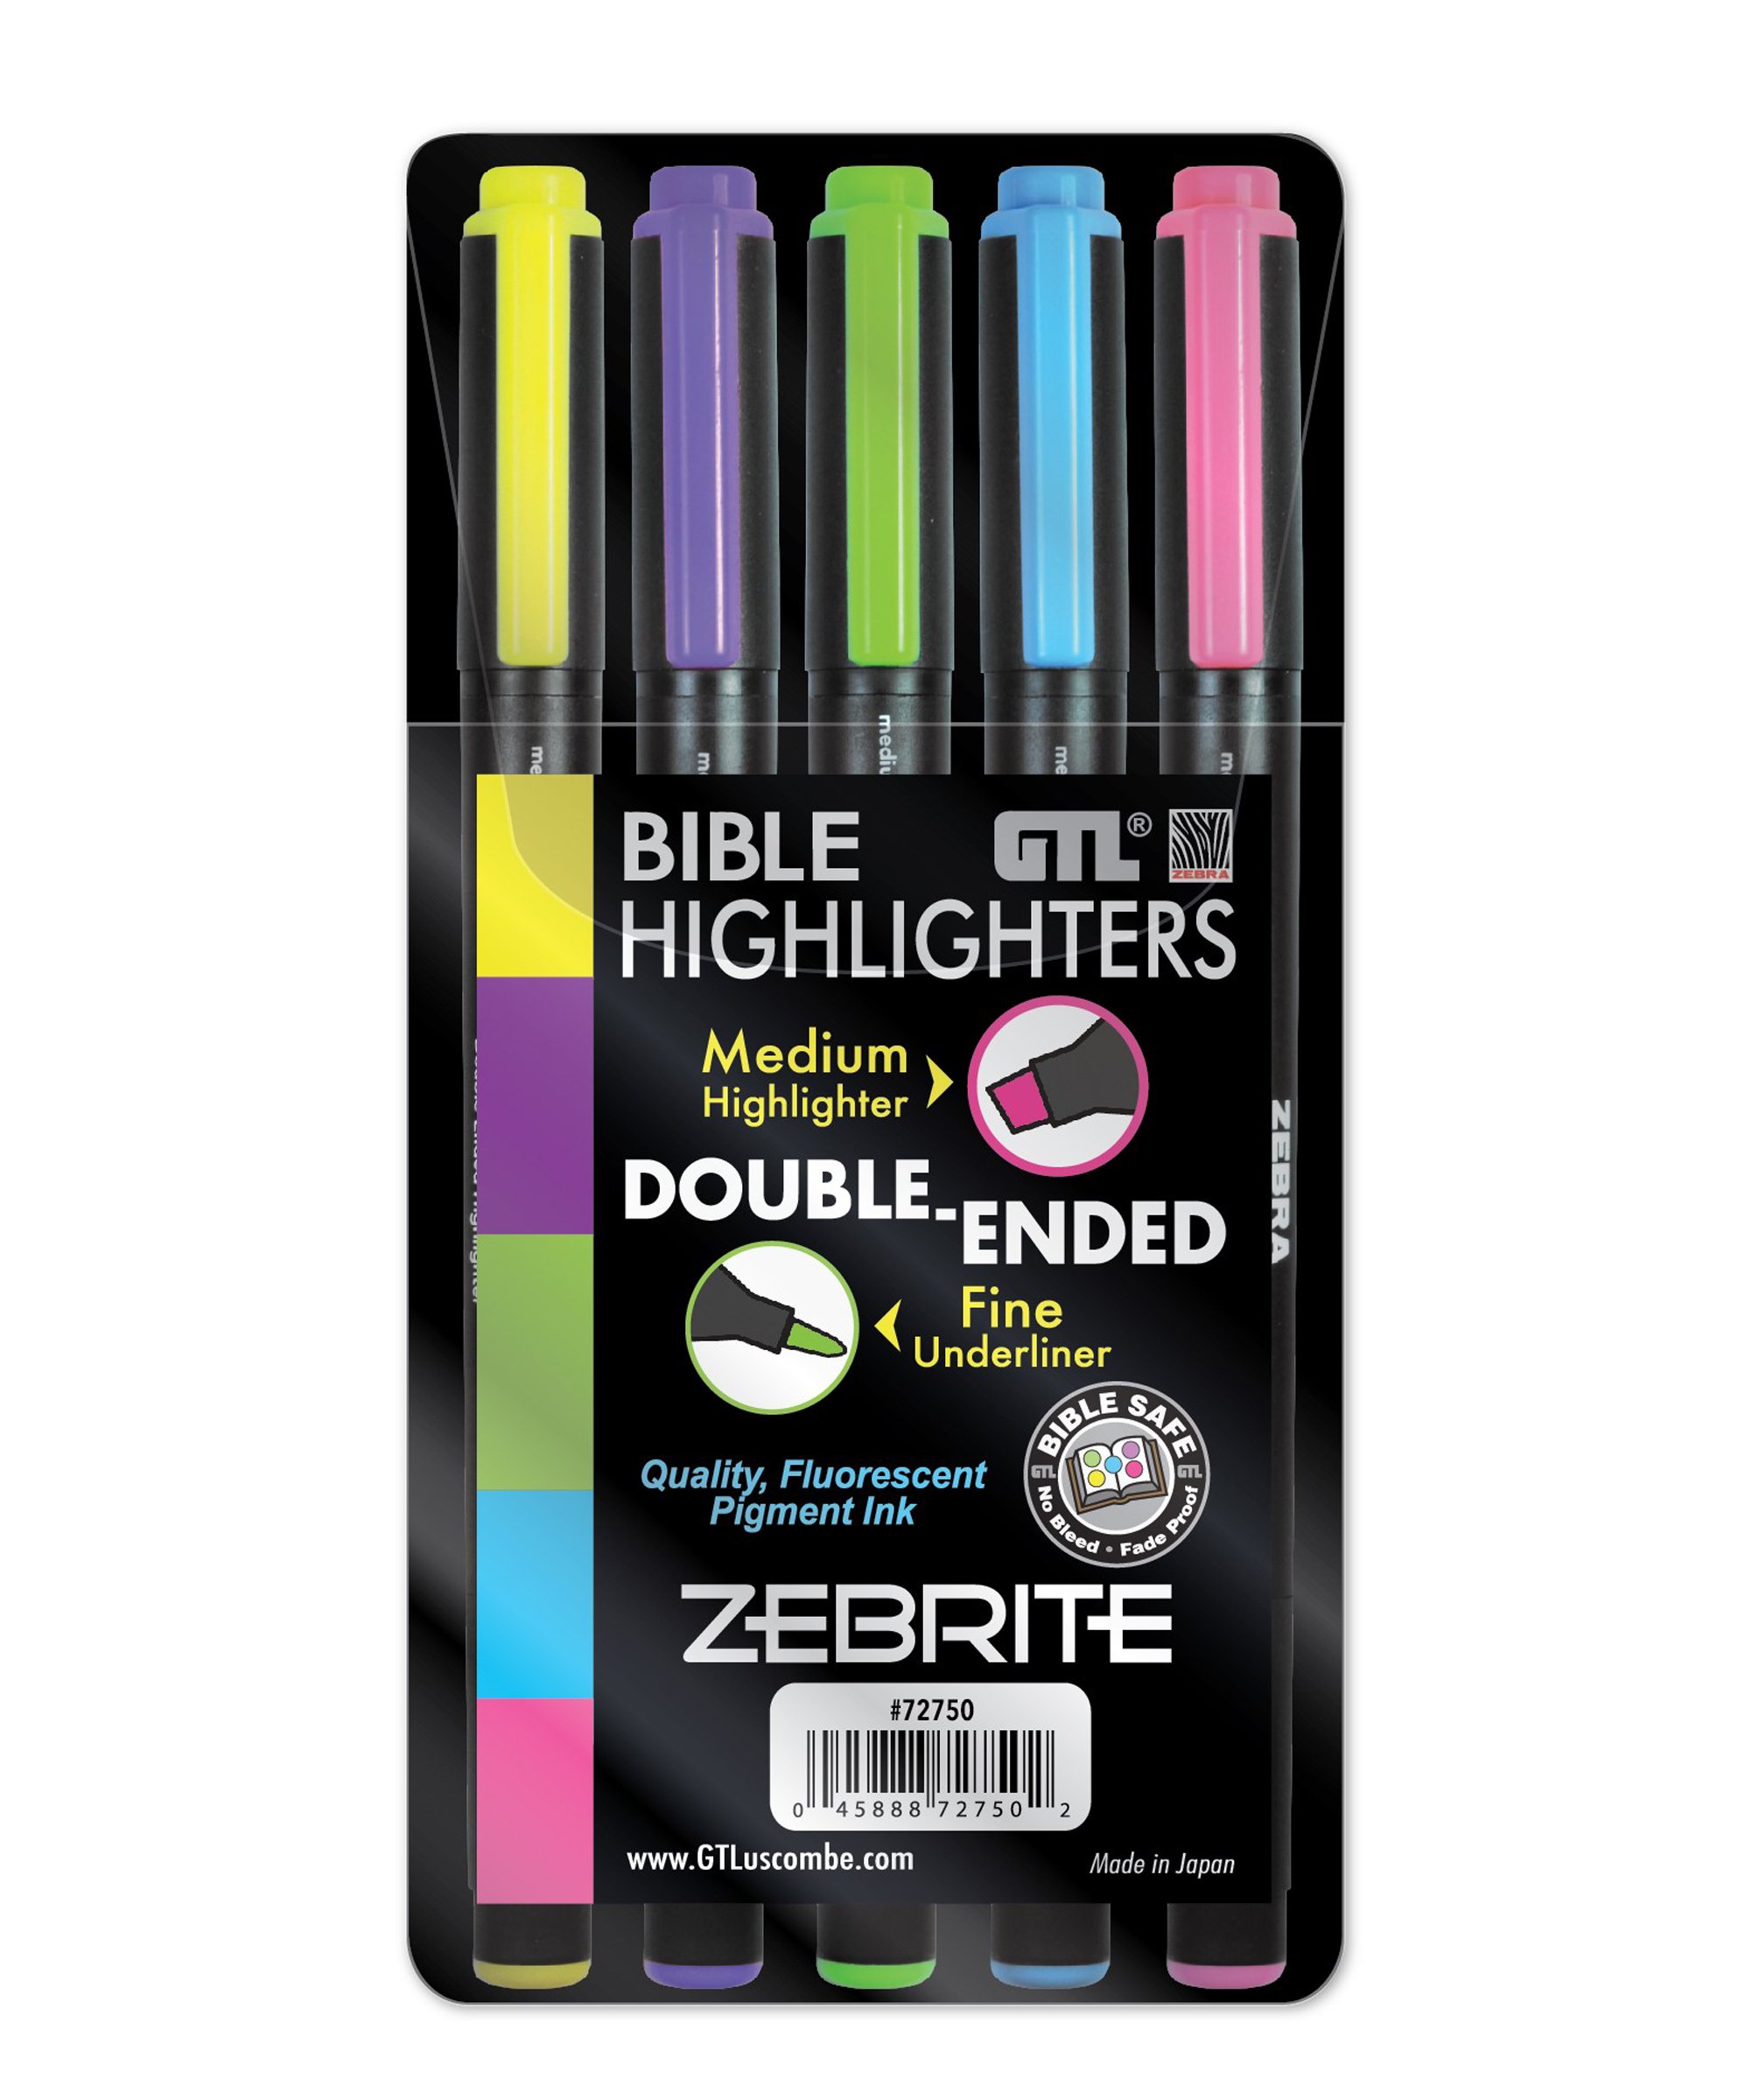 Bible Highlighters Double End Book Highlighters No Bleed 6 Pieces